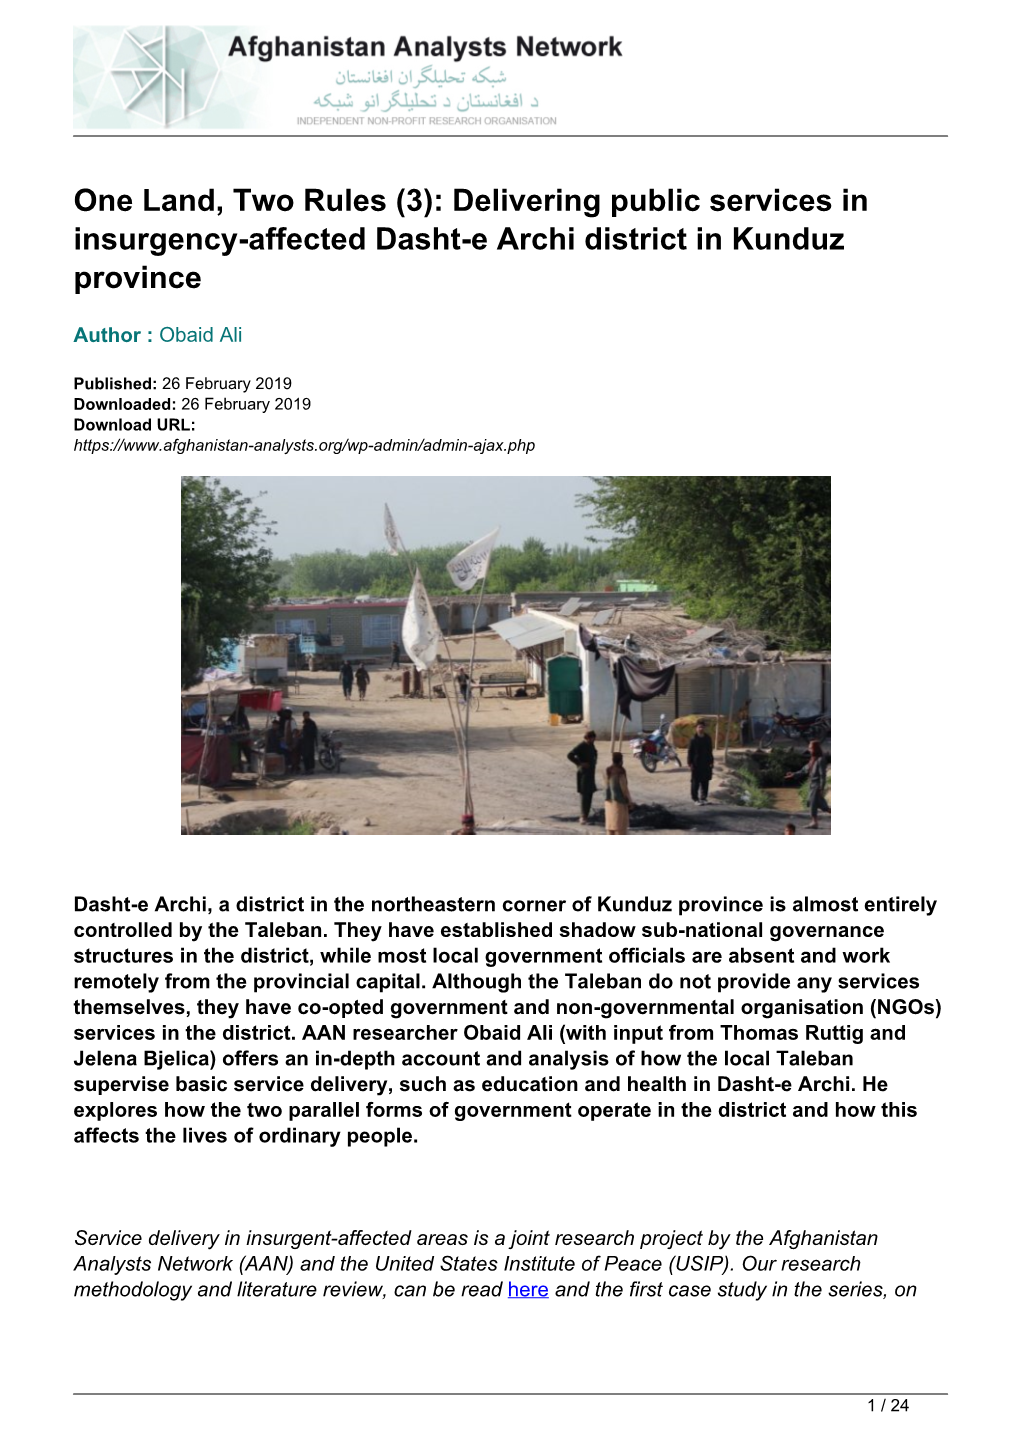 One Land, Two Rules (3): Delivering Public Services in Insurgency-Affected Dasht-E Archi District in Kunduz Province